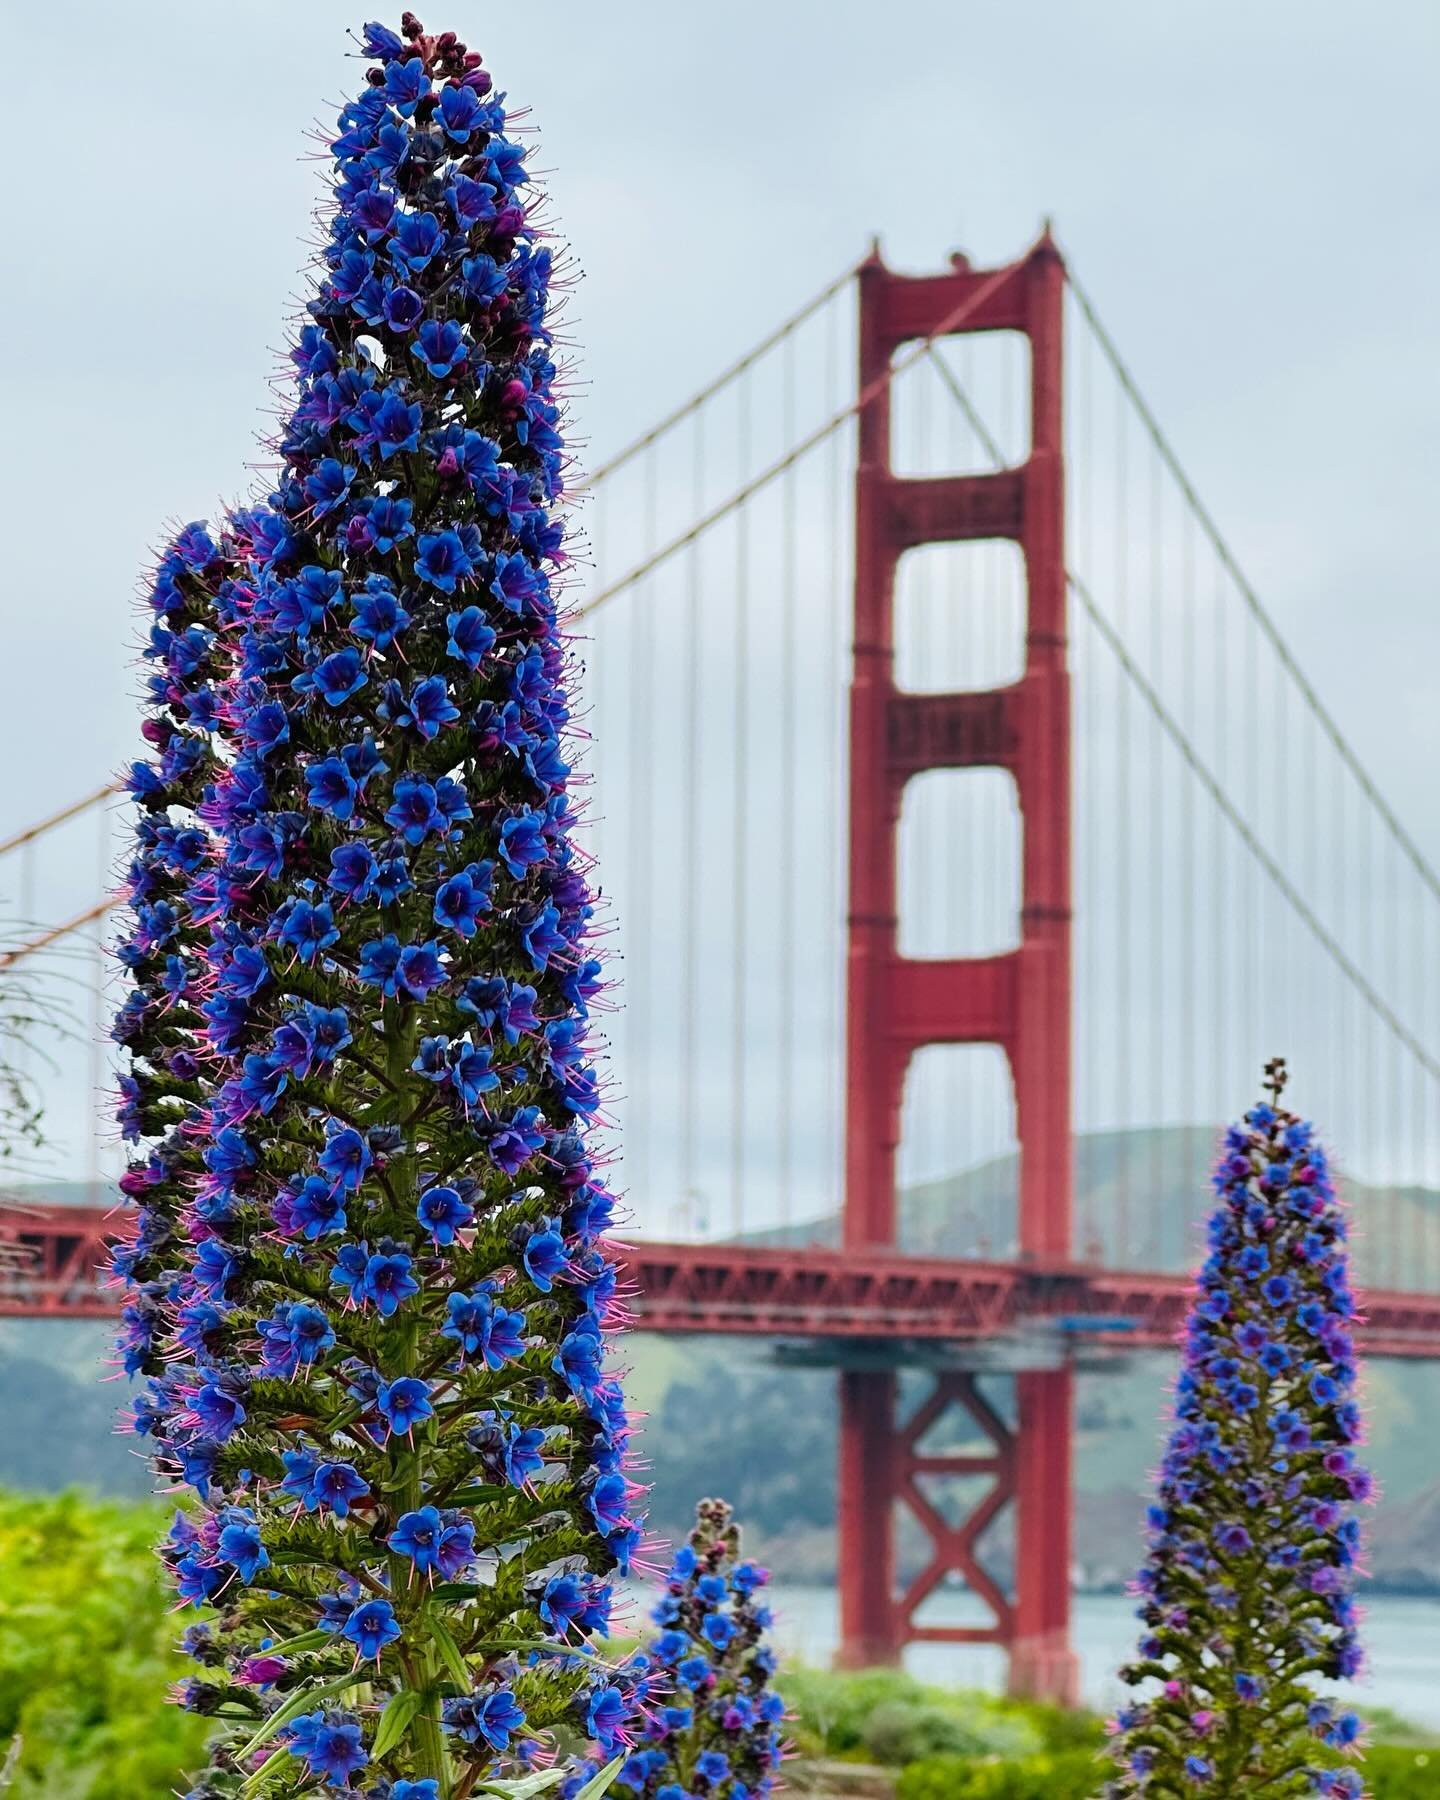 Pride of Madeira. You know it&rsquo;s Spring in SF when you start to see these violet blooms all over the @presidiosf. 
P
L
A
N
T
S
#prideofmadiera #plants #presidiosf #streetsofsf #prideofsf #yoursf #mysf #howsfseessf #florafauna #goldengatebridge #